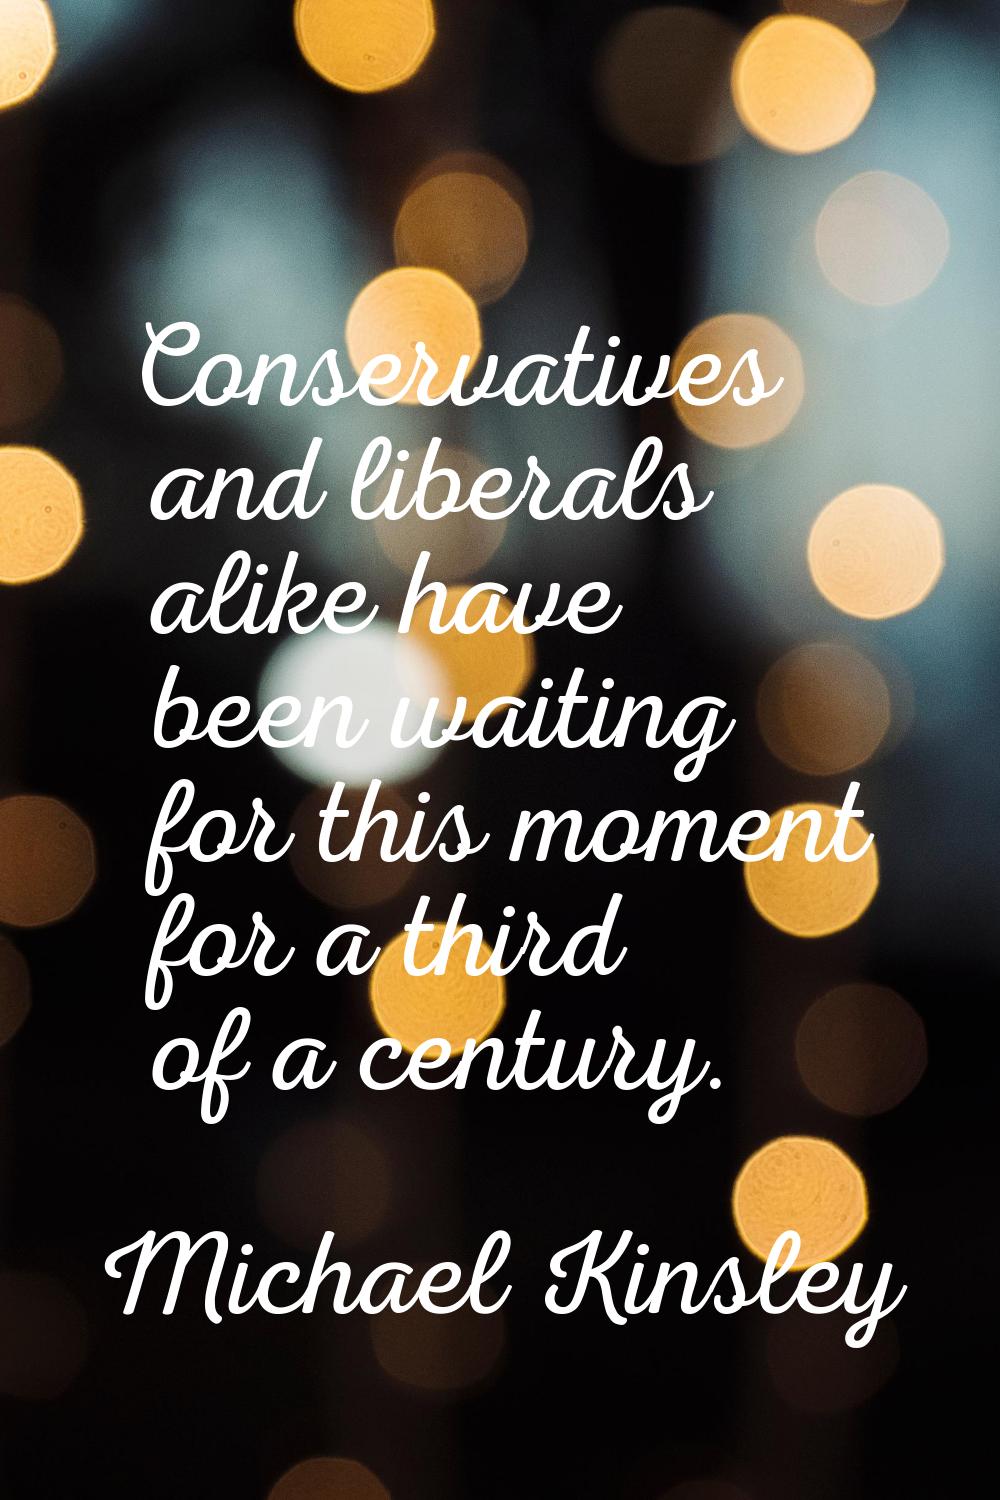 Conservatives and liberals alike have been waiting for this moment for a third of a century.